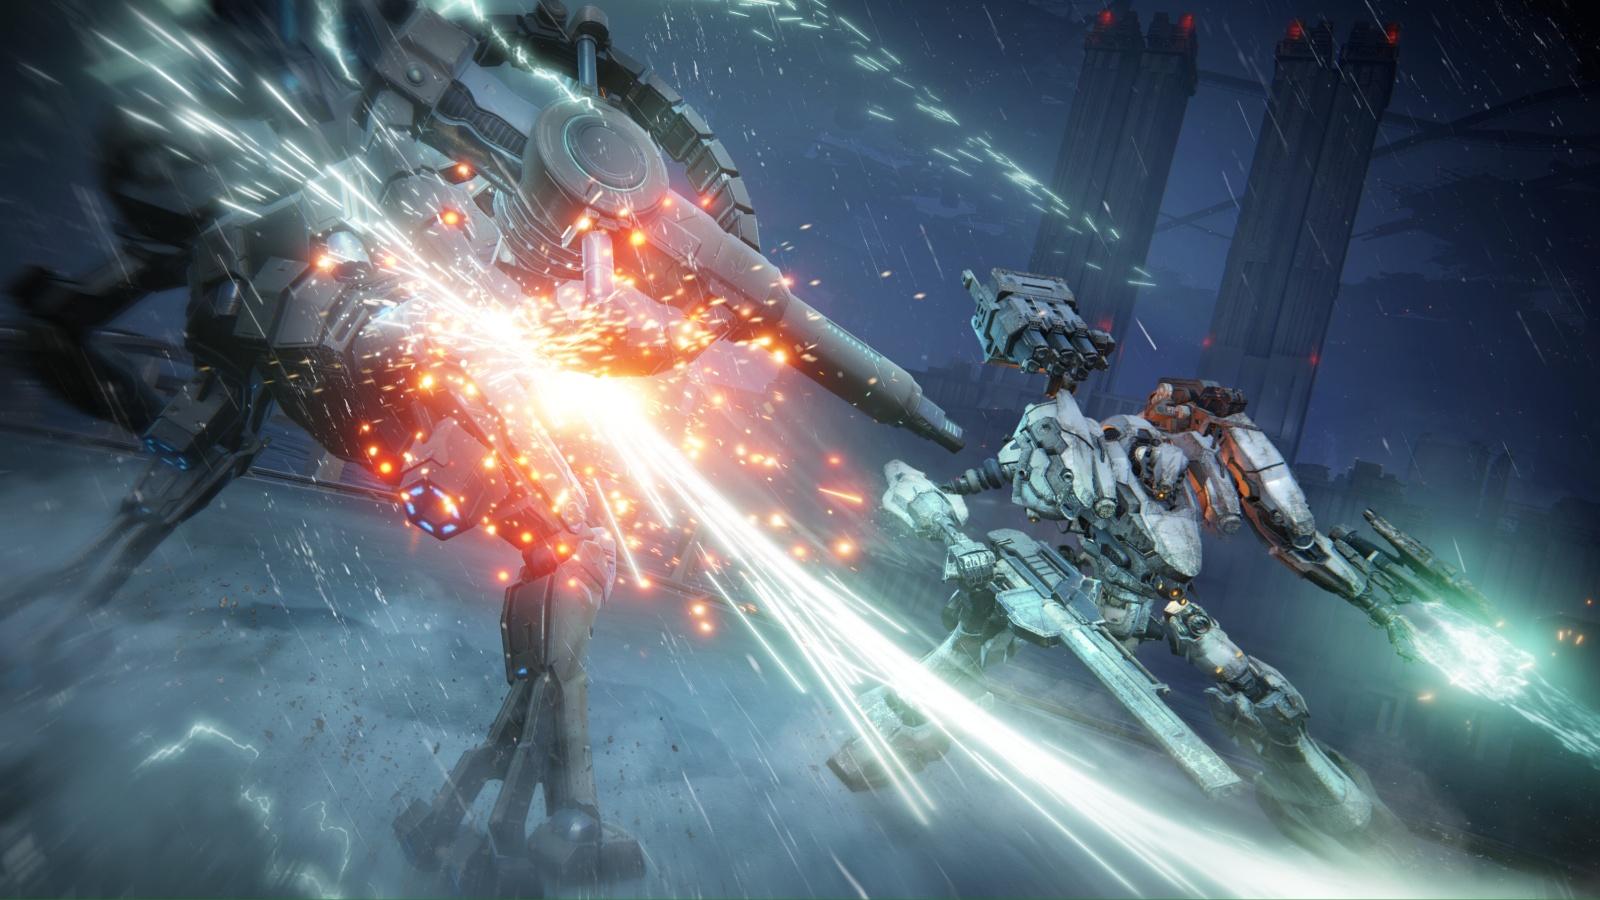 Does ​​​​​​Armored Core VI: Fires Of Rubicon Have Cross-Play